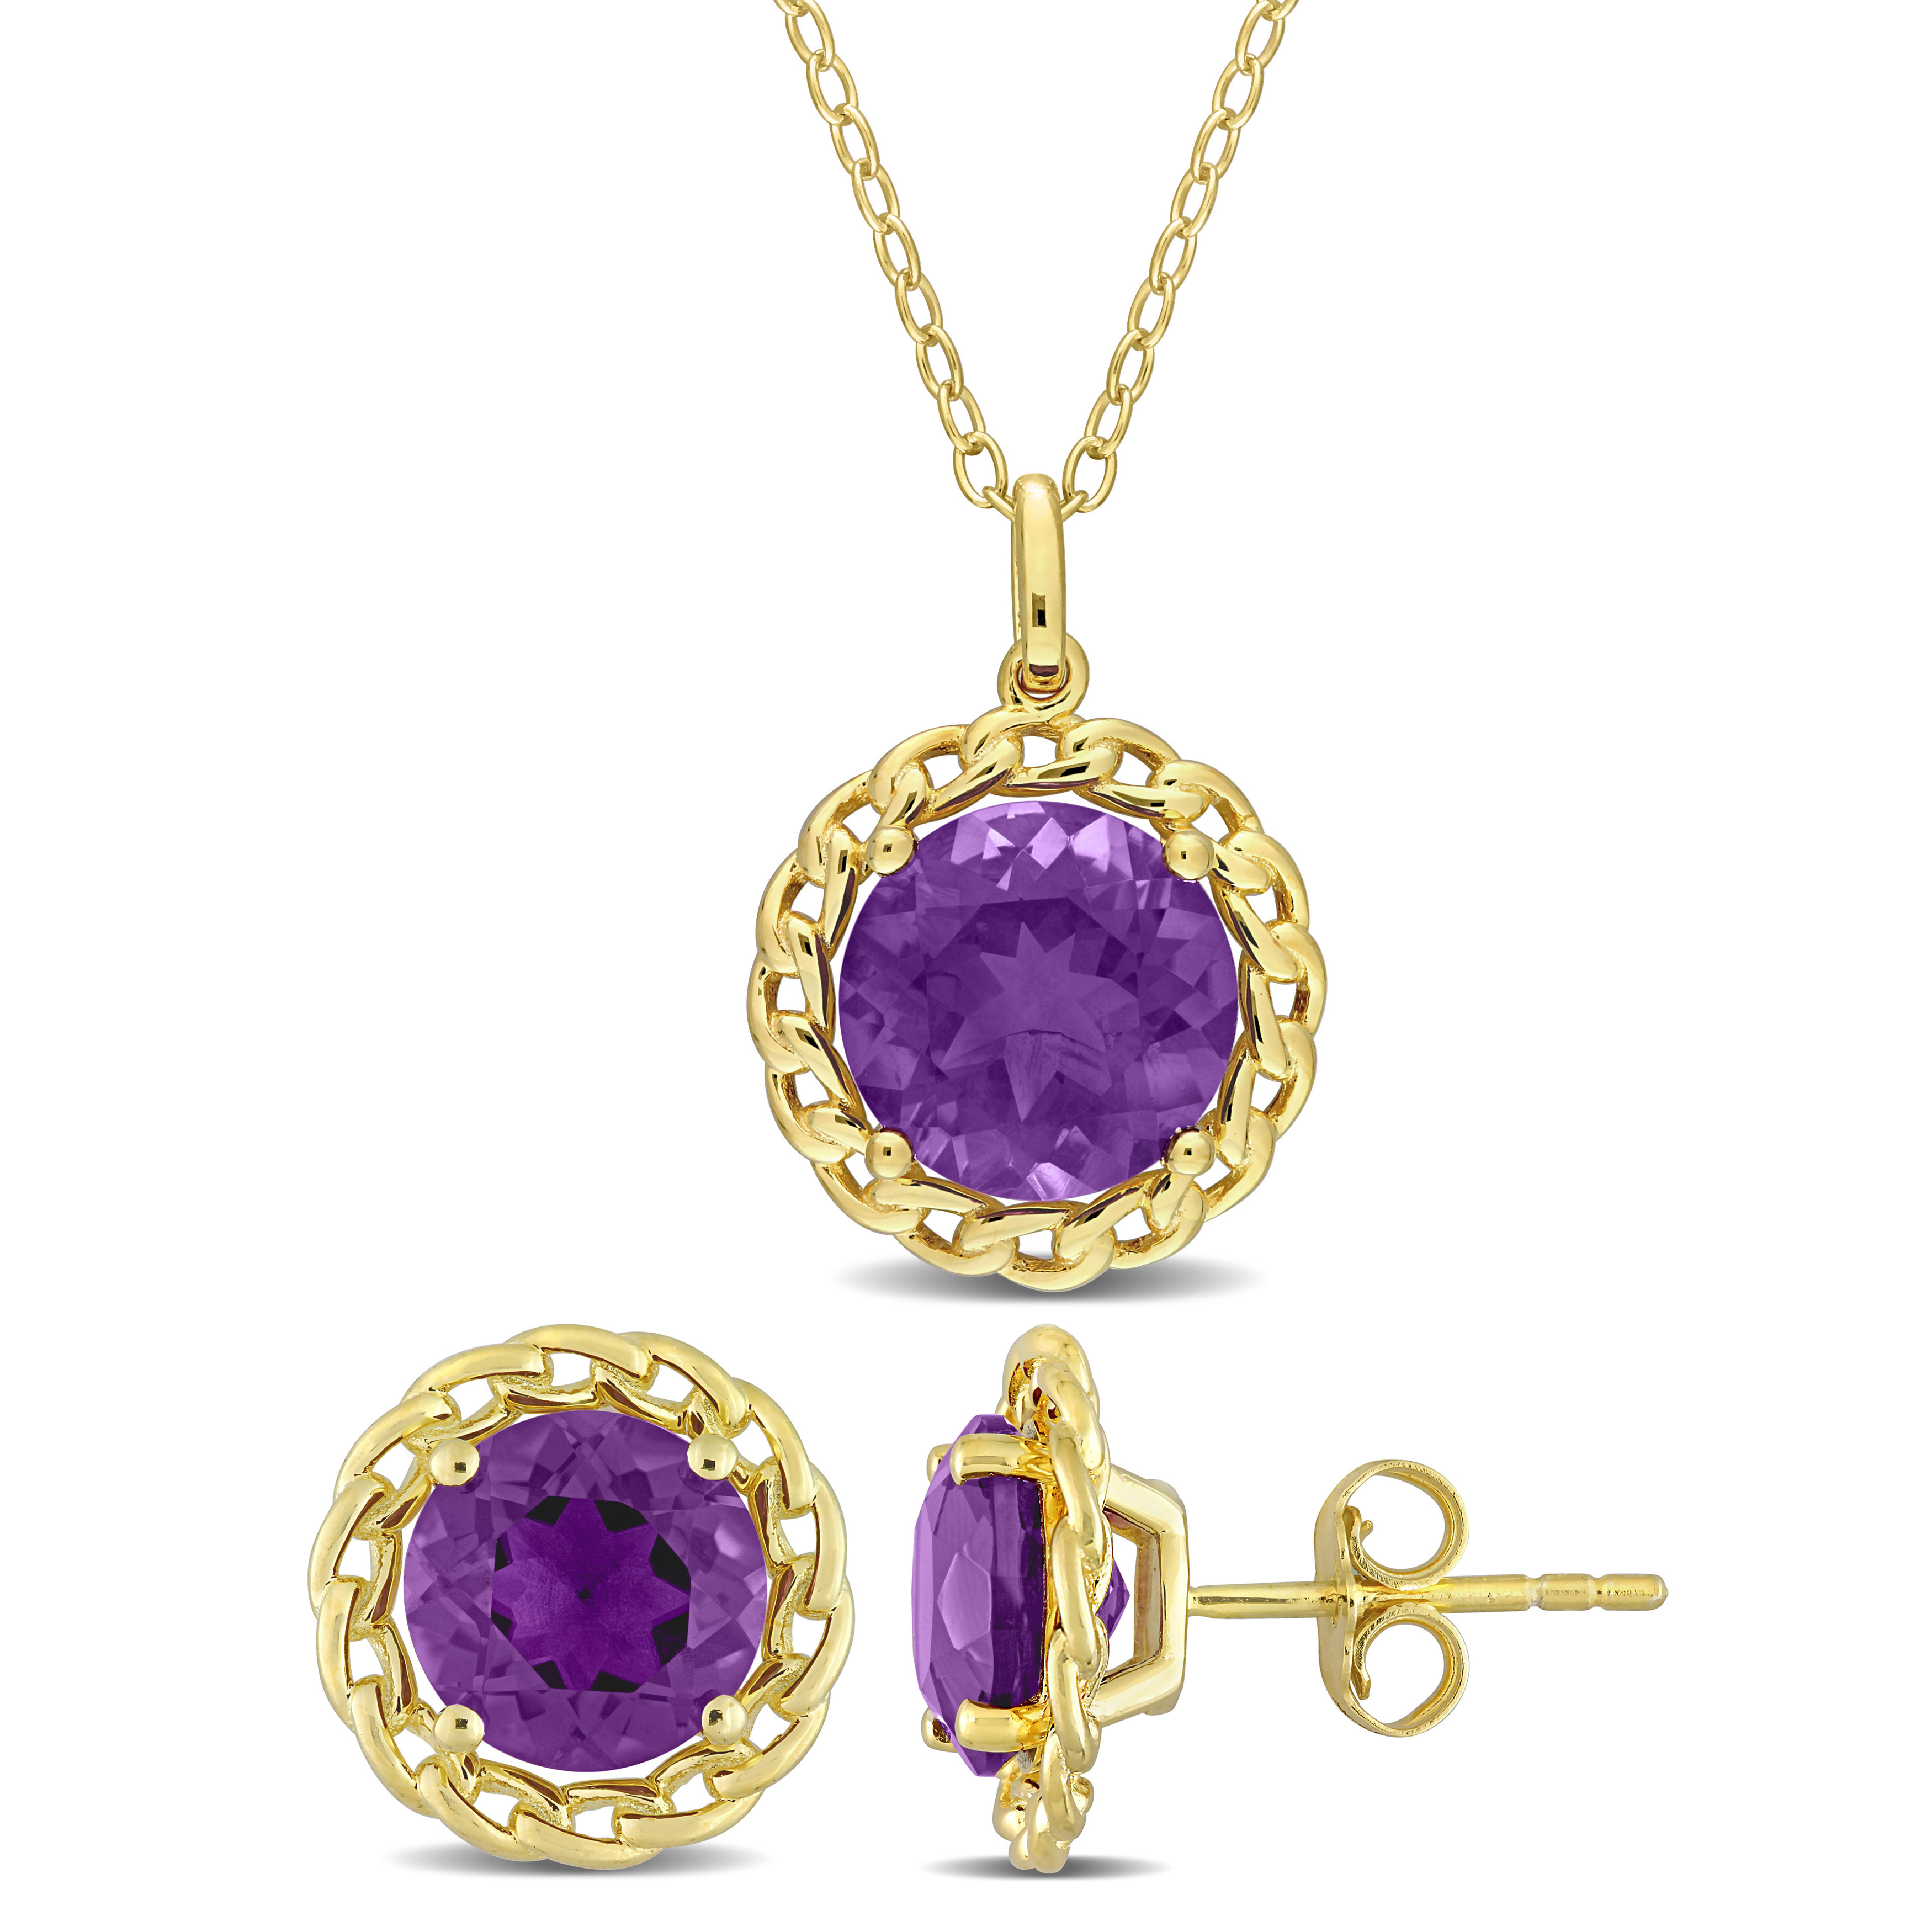 6 CT TGW African Amethyst 2-Piece Solitaire Necklace and Earrings Set in Yellow Plated Sterling Silver